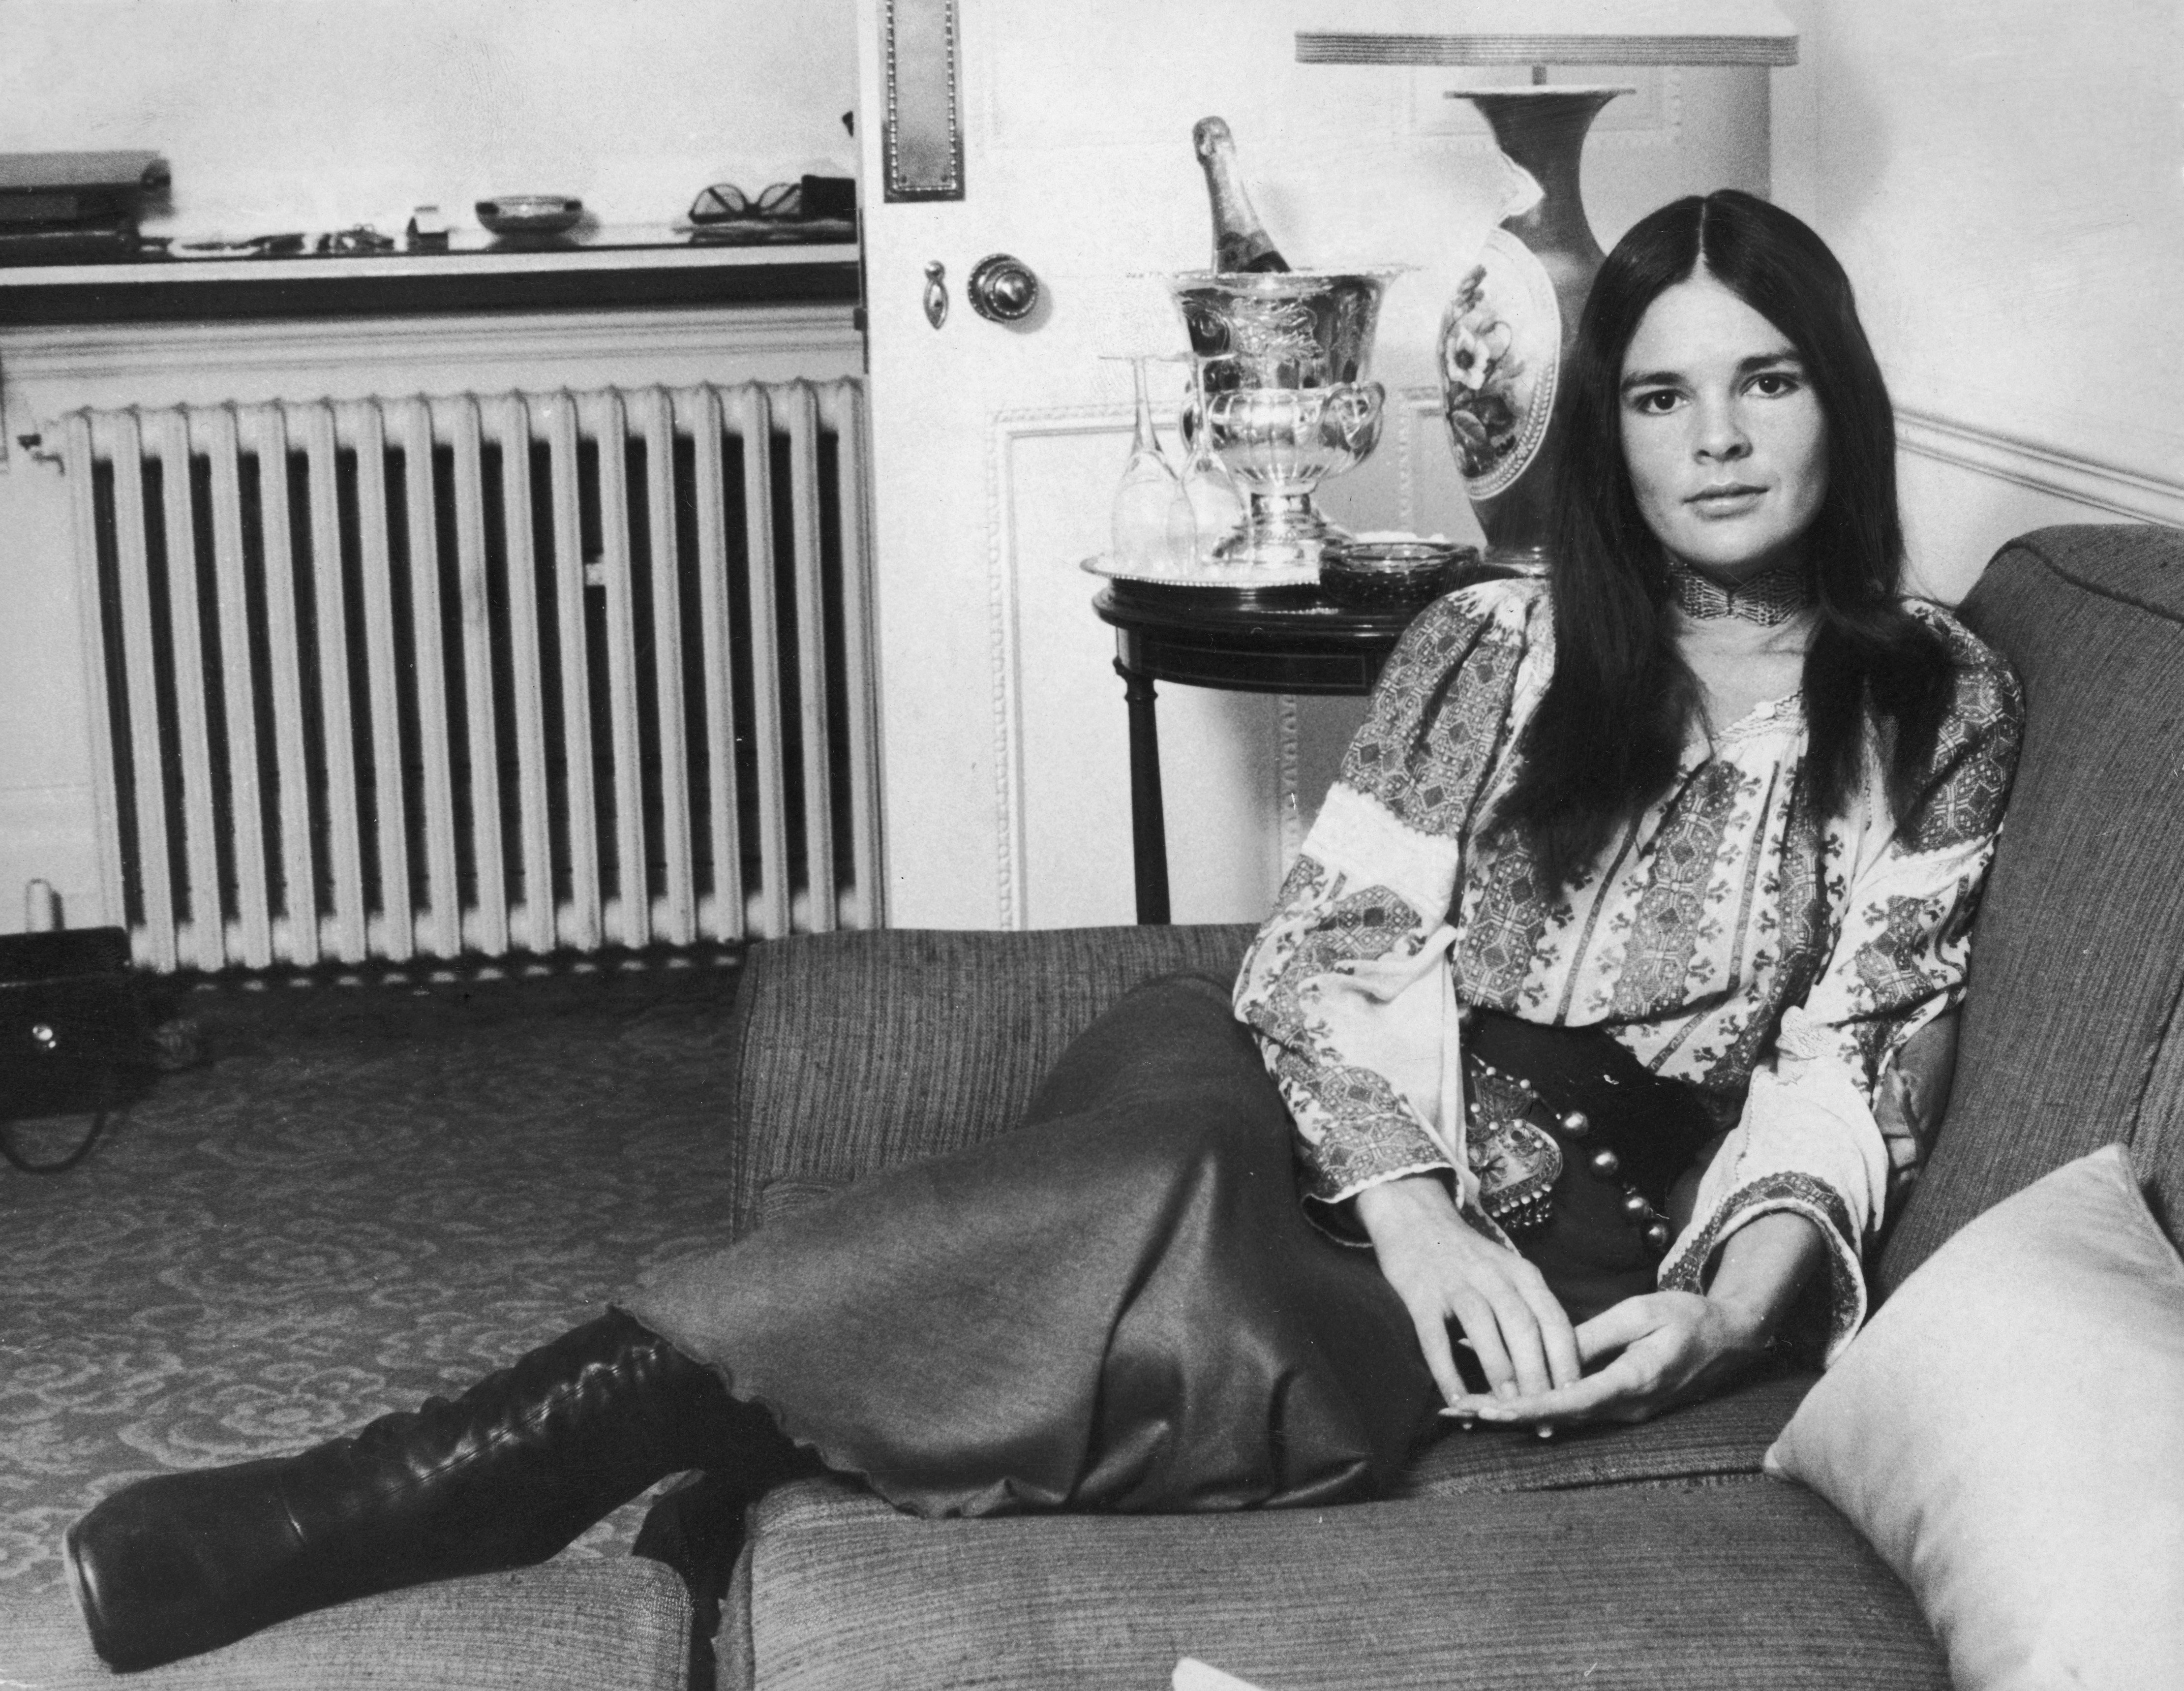 Style icon and former model Ali MacGraw seated on the couch wearing leather boots paired with a long skirt and a floral blouse on March 8, 1971. / Source: Getty Images